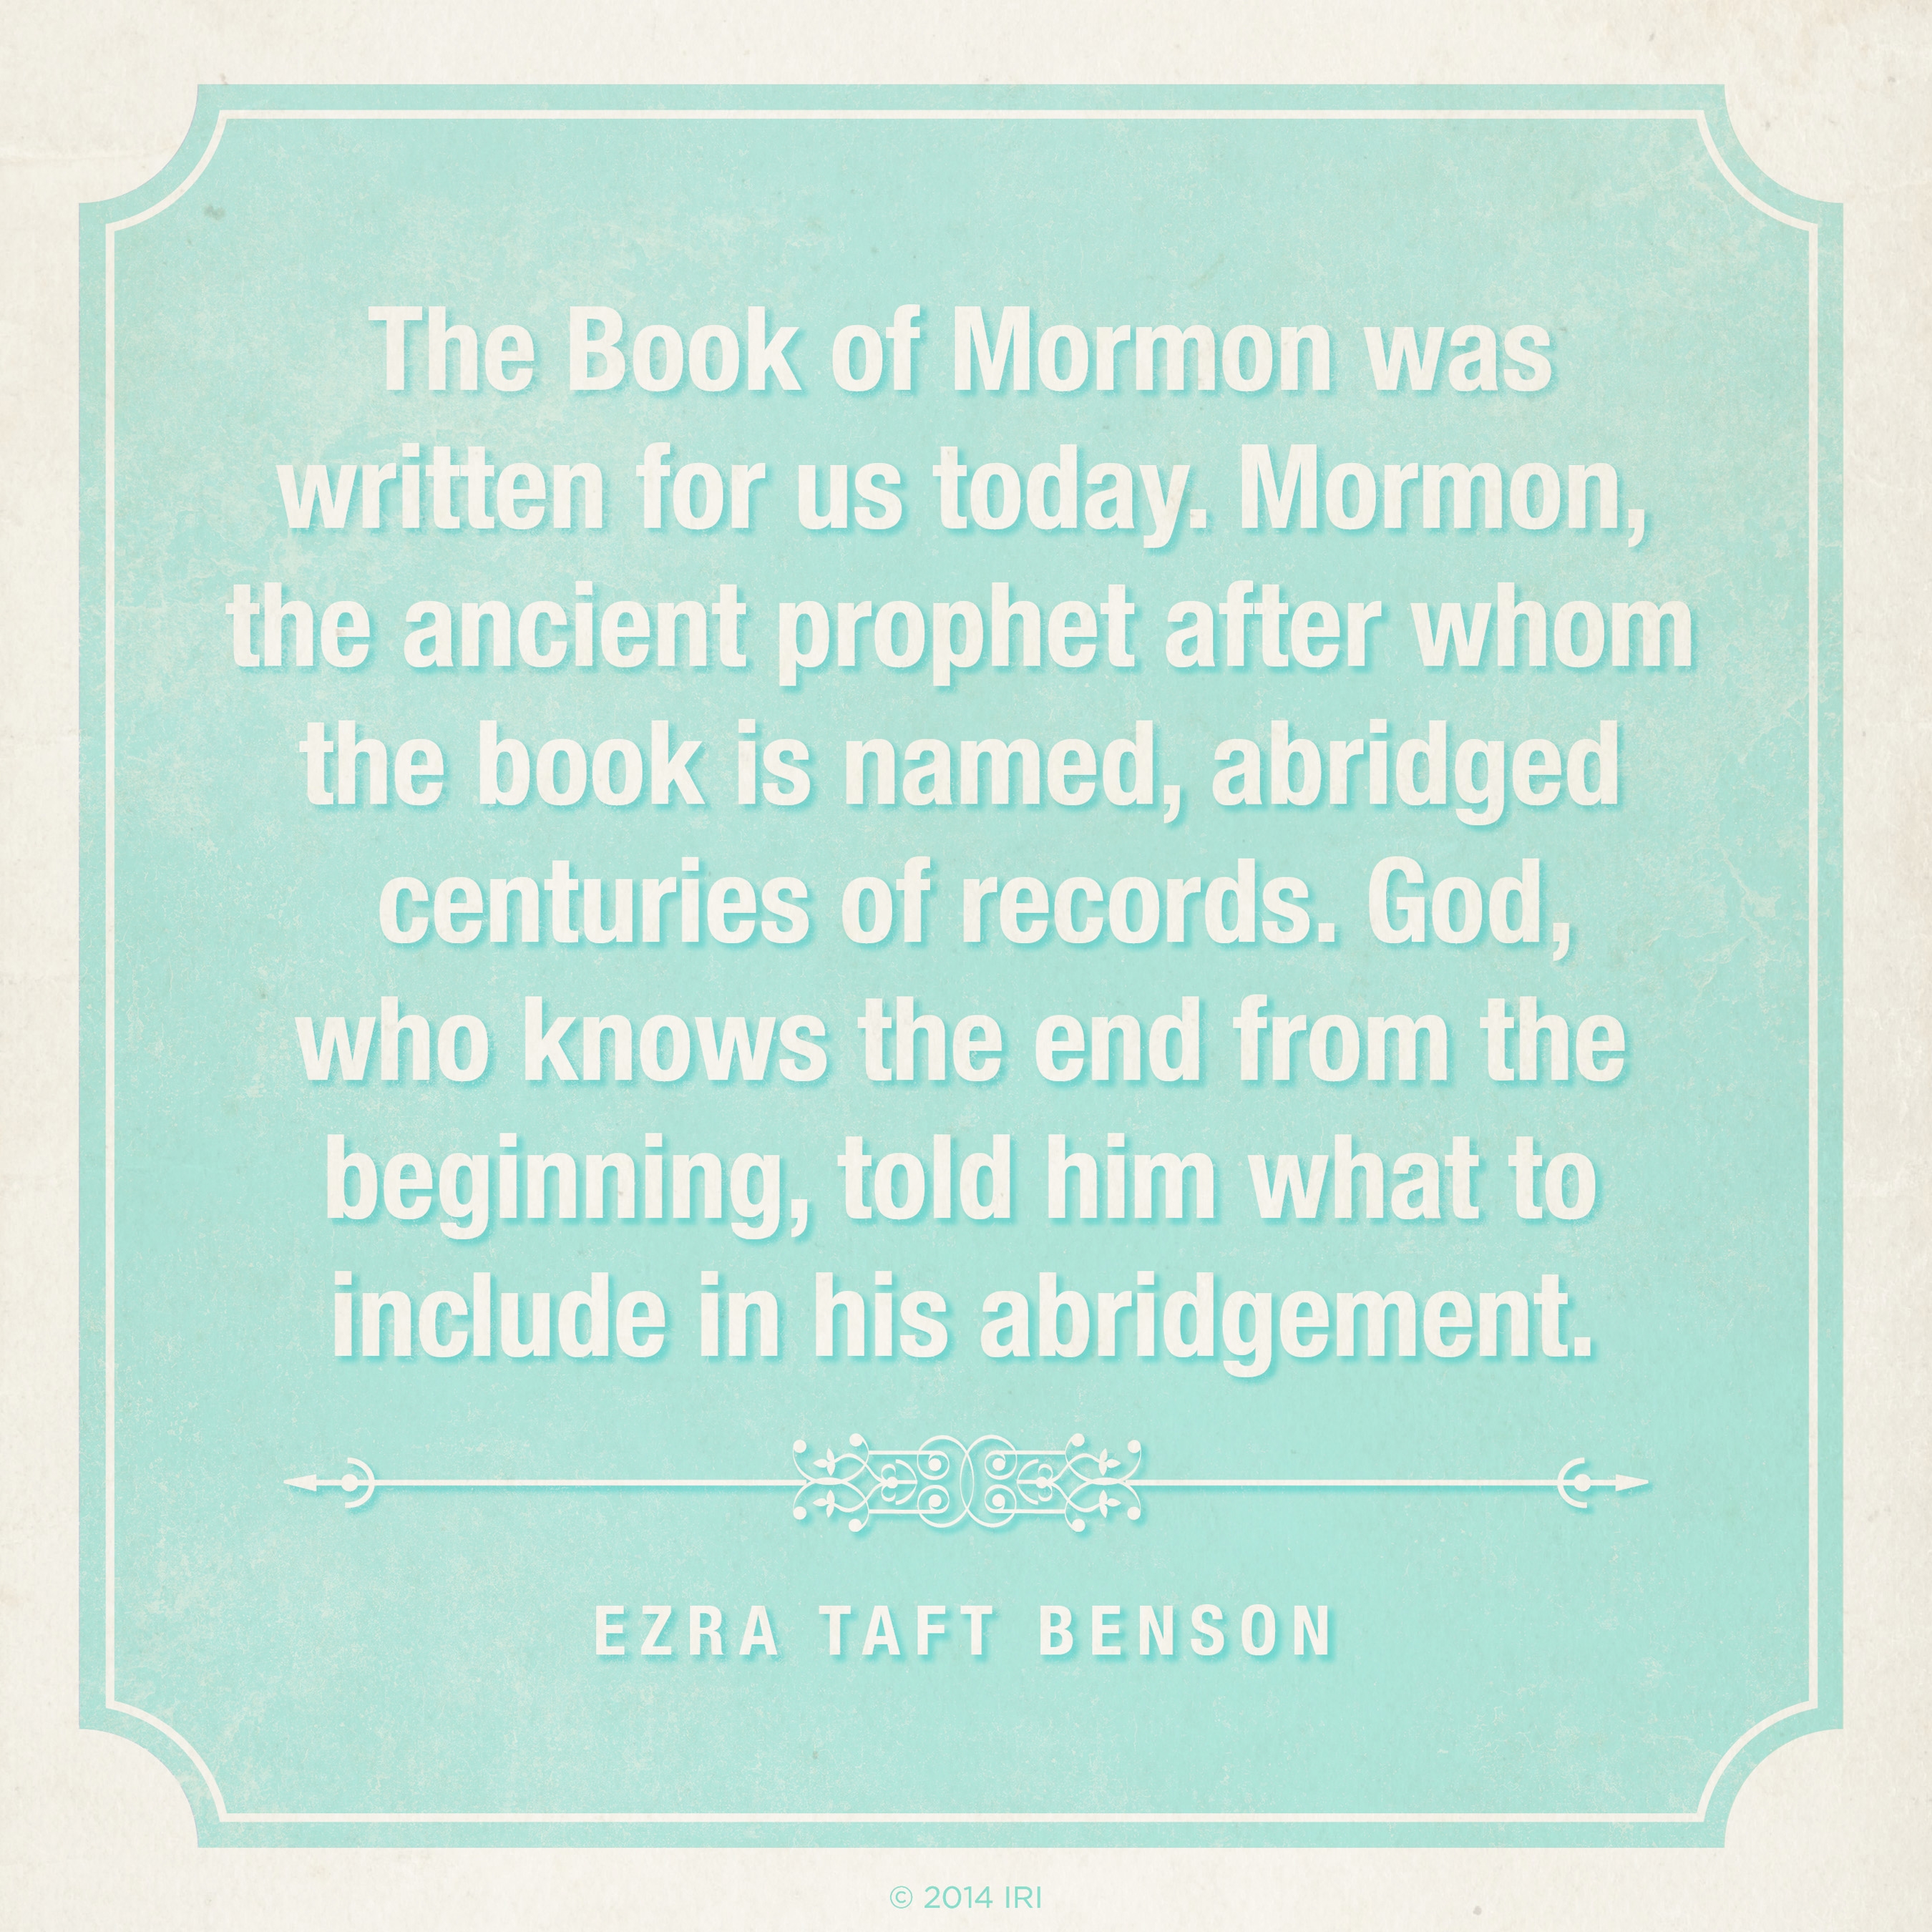 A light blue background with a white border and white text quoting President Ezra Taft Benson: “The Book of Mormon was written for us today.”